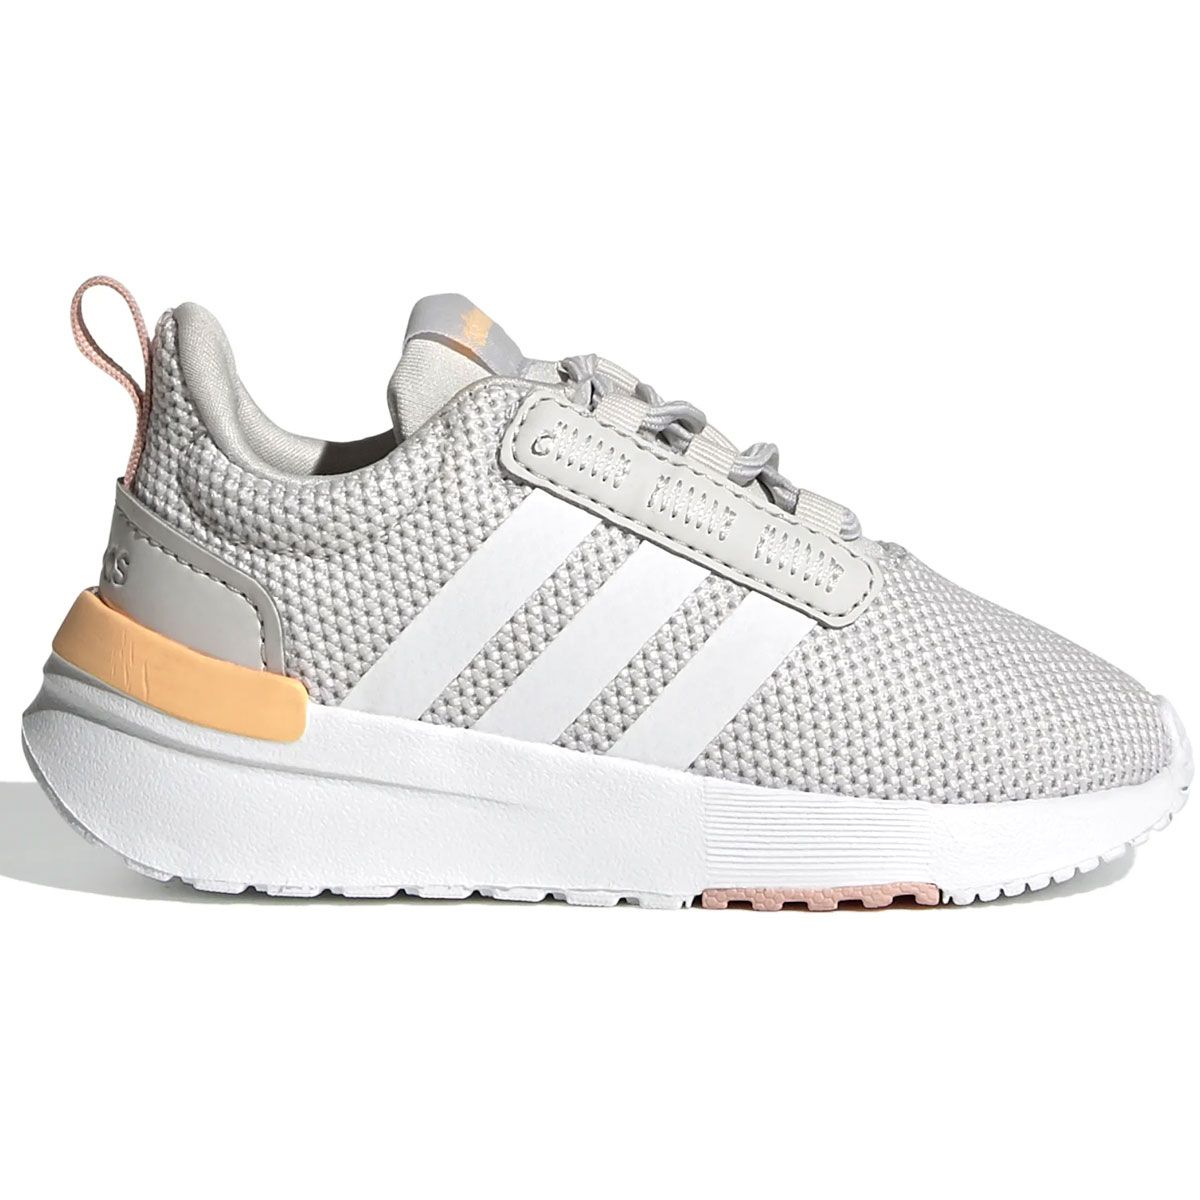 adidas Racer TR21 Sneakers